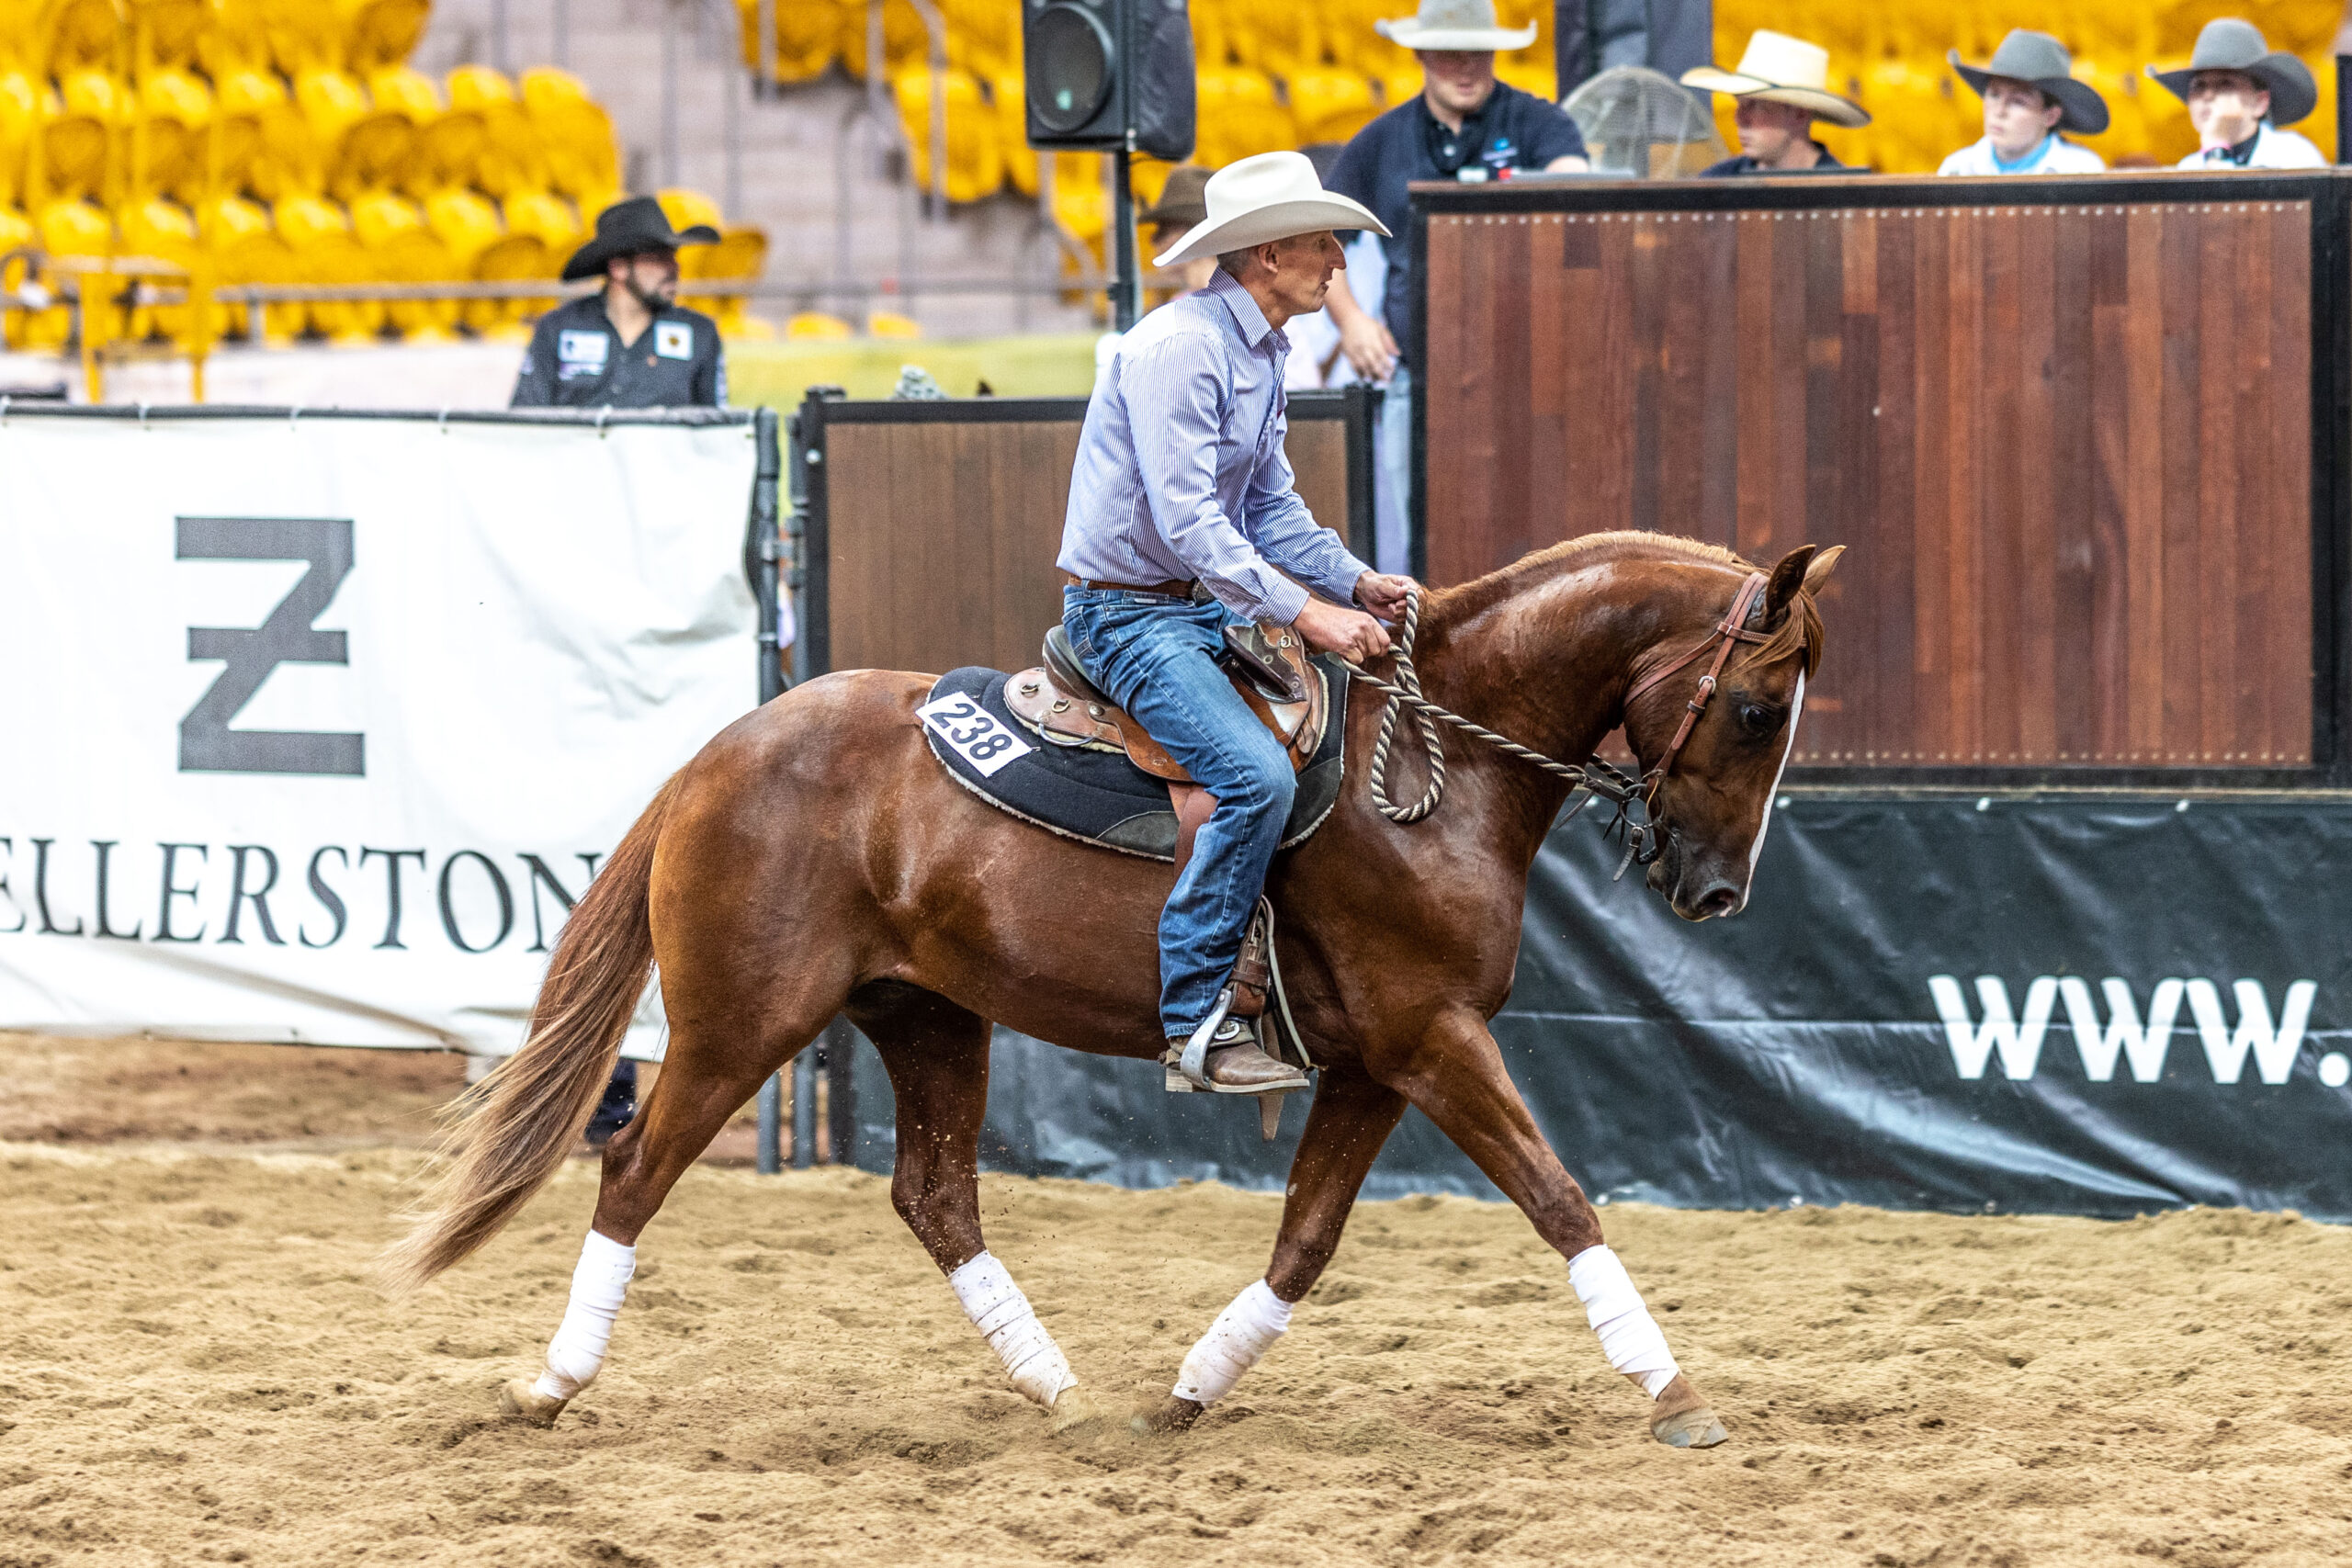 Momentum continued with solid prices on Day 2 of the 2023 Nutrien Classic Sale